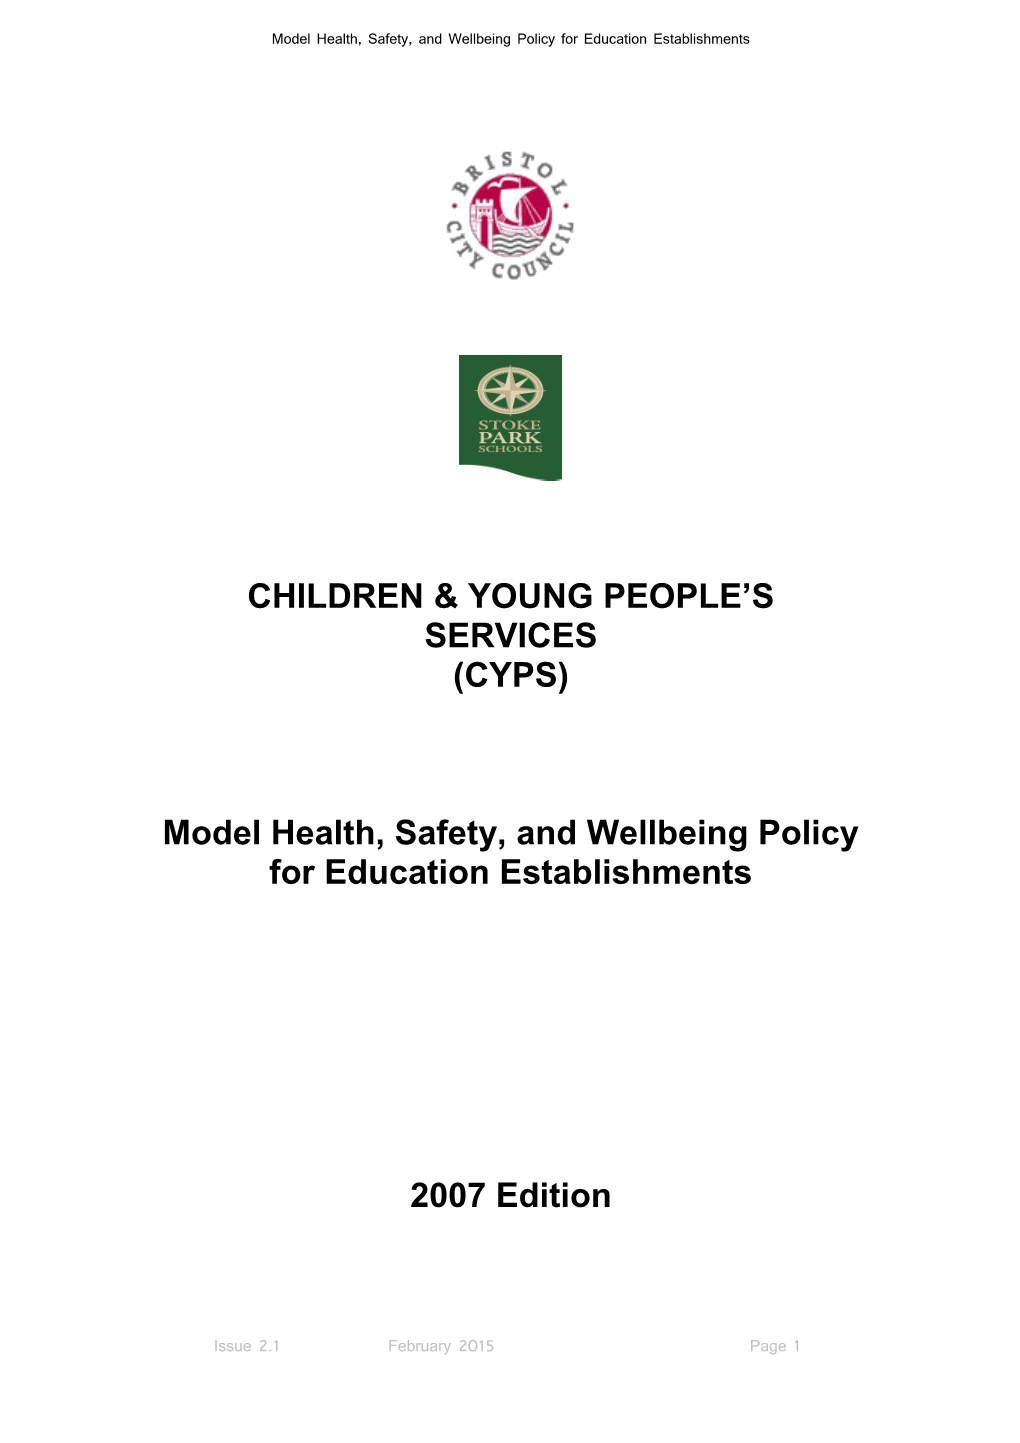 Model Health, Safety, and Wellbeing Policy for Education Establishments